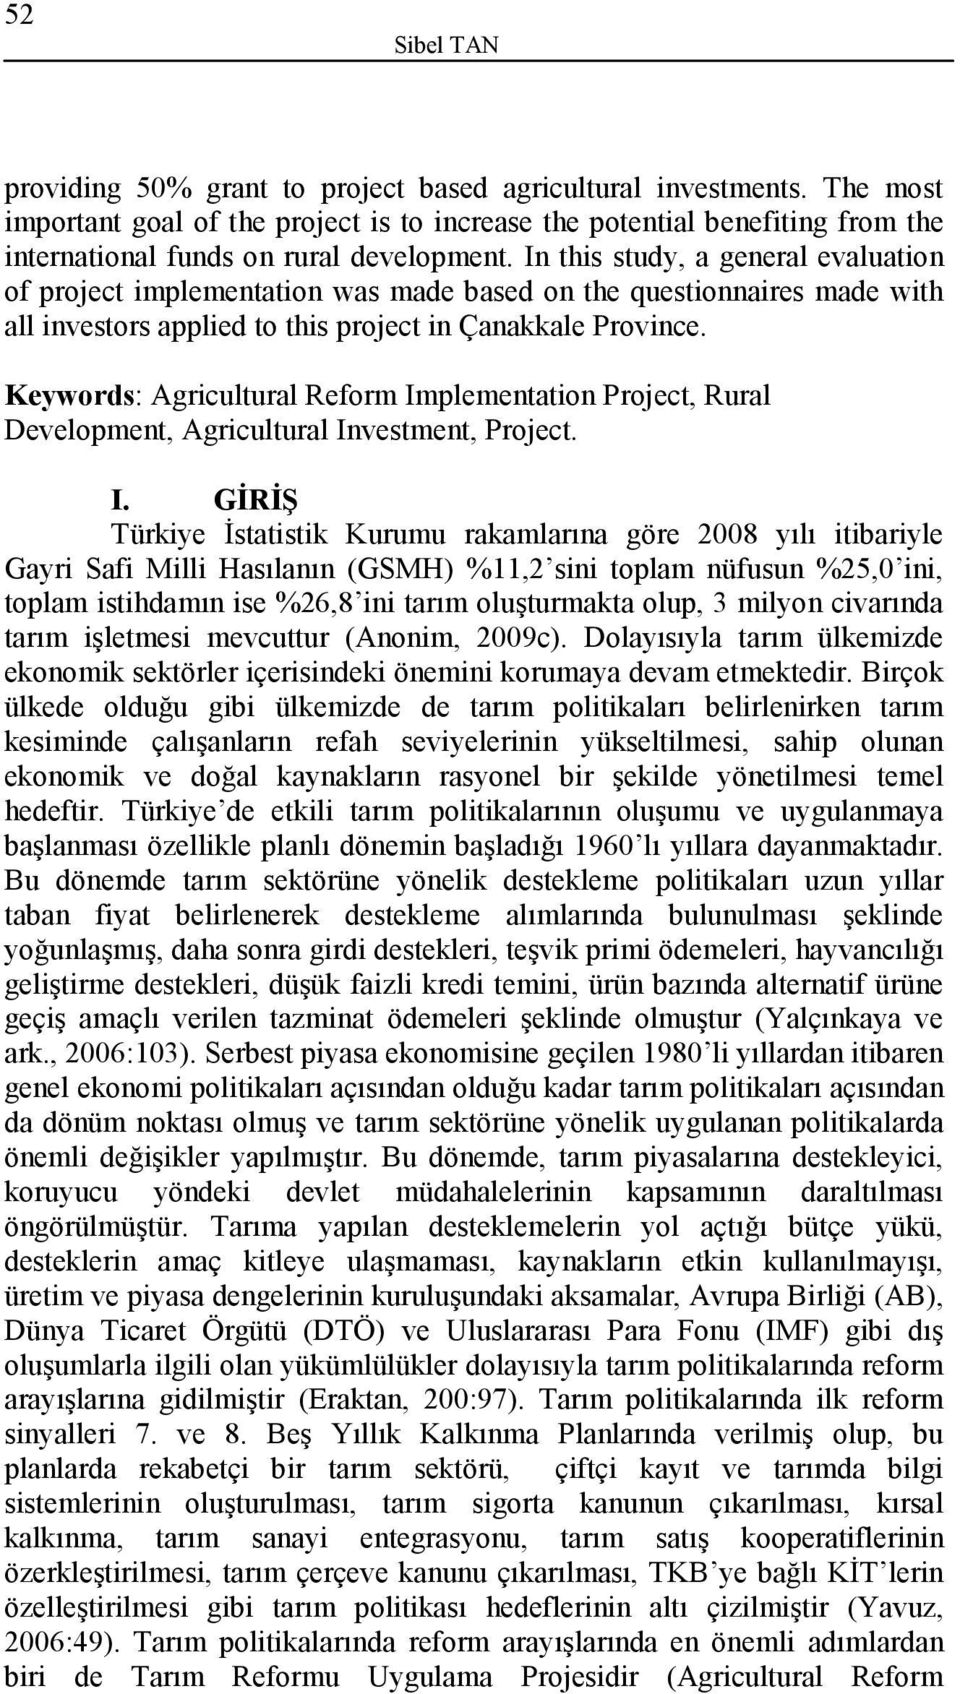 In this study, a general evaluation of project implementation was made based on the questionnaires made with all investors applied to this project in Çanakkale Province.